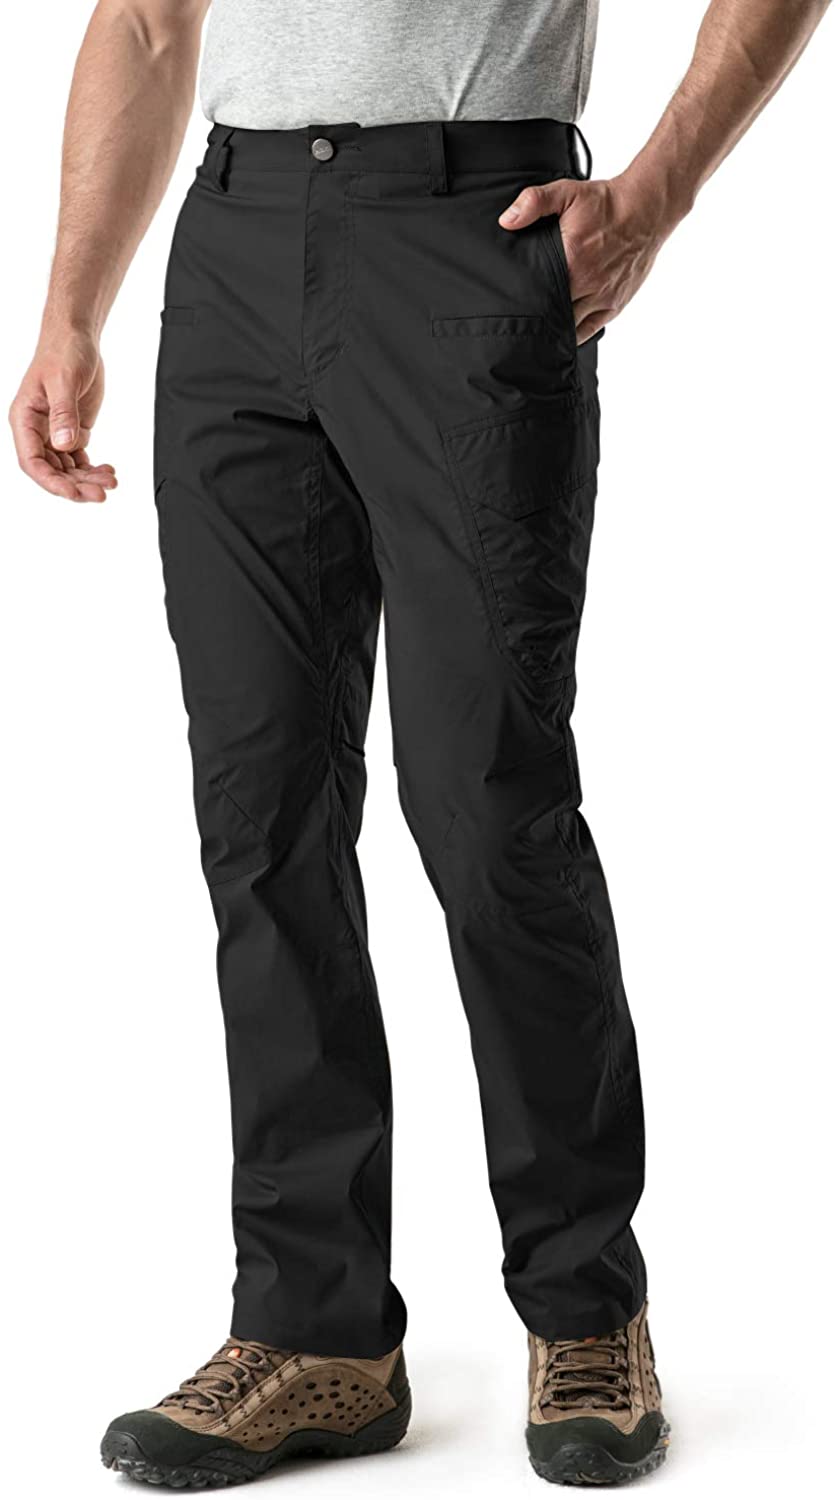 Water Resistant Outdoor Pants CQR Men's Hiking Pants Lightweight Stretch Cargo/Straight Work Pants UPF 50+ Outdoor Apparel 